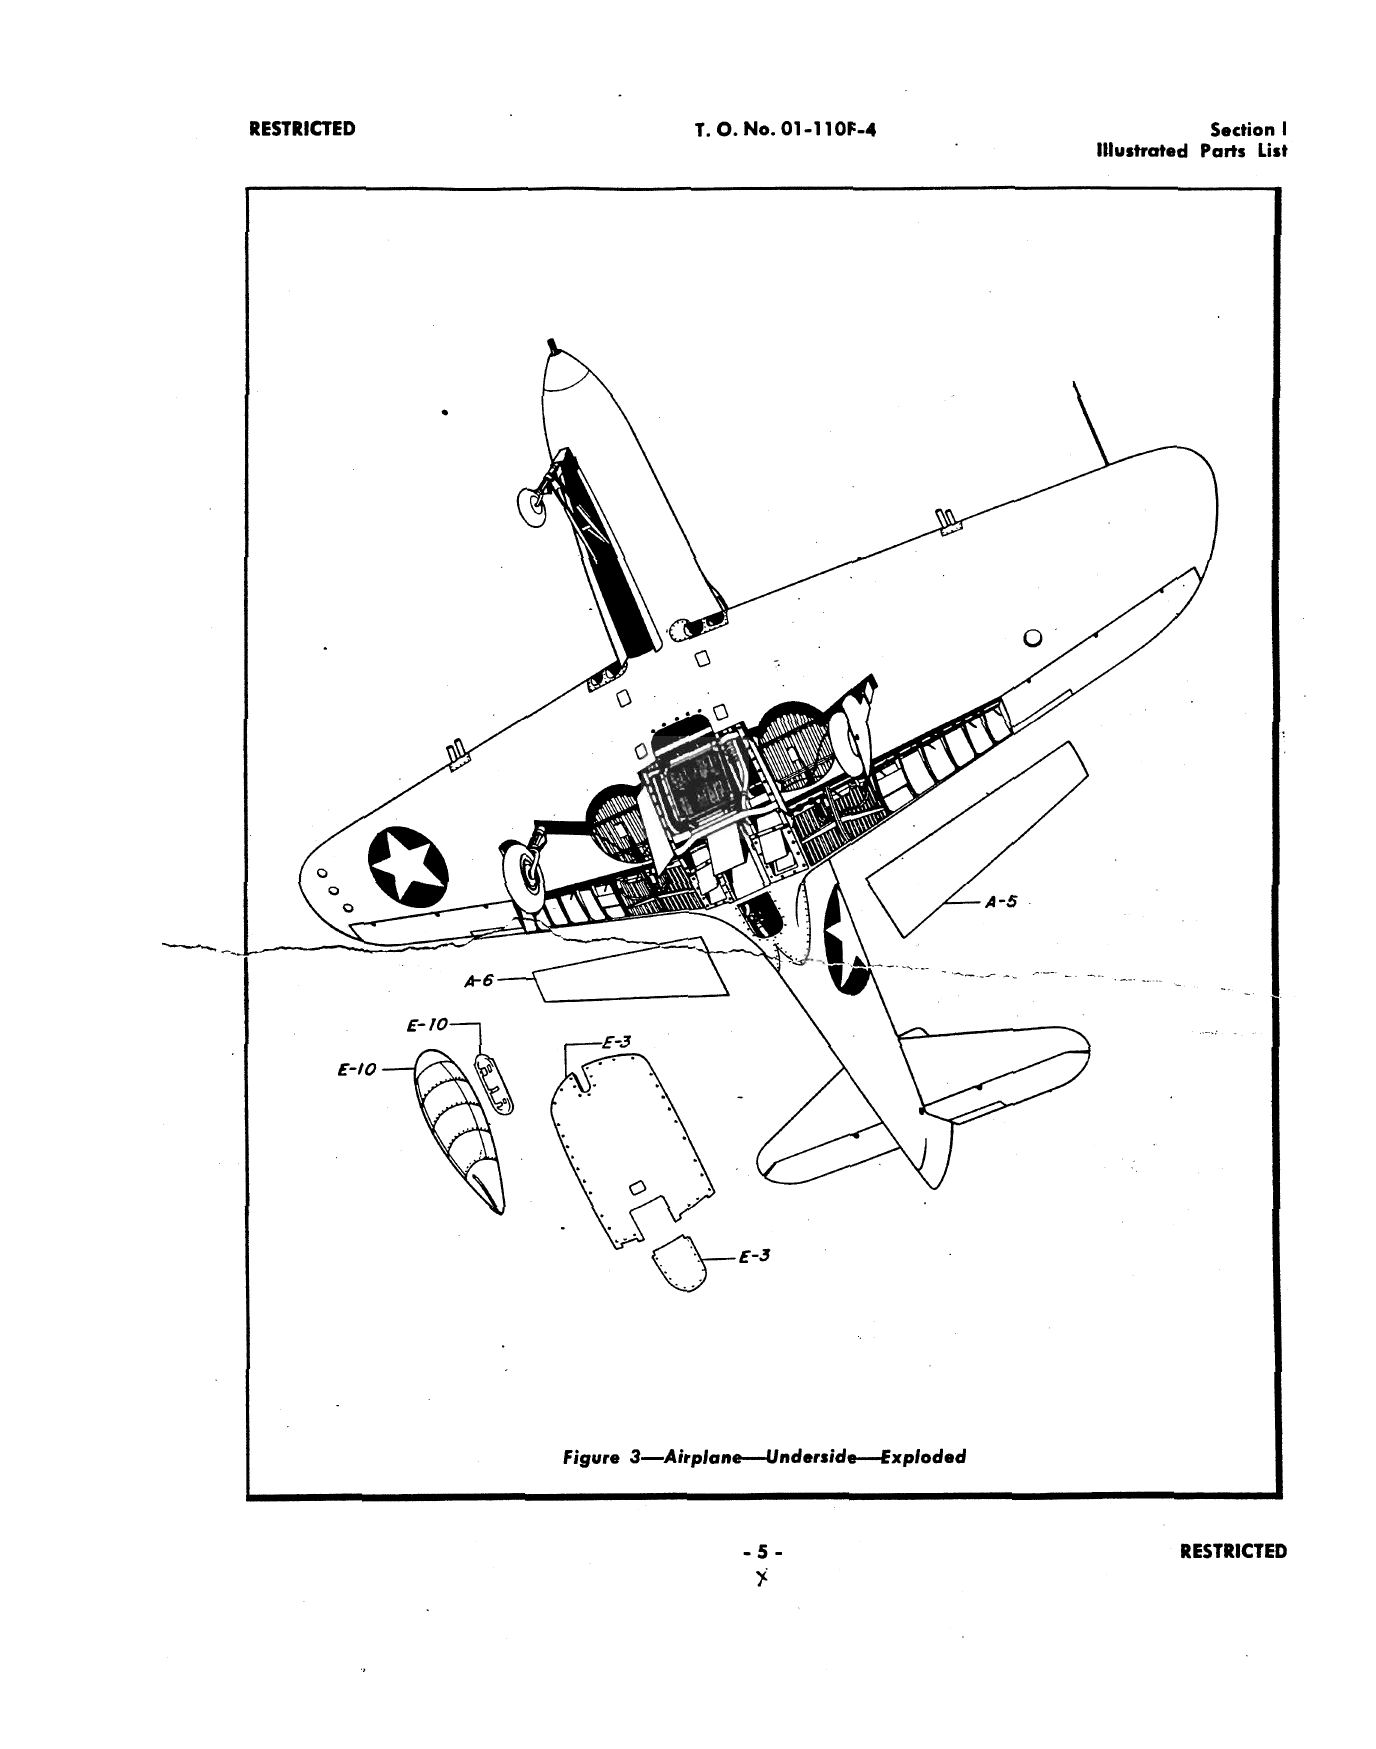 Sample page 9 from AirCorps Library document: Parts Catalog for P-400, P-93D, D-1, D-2 and K-1 Airplanes